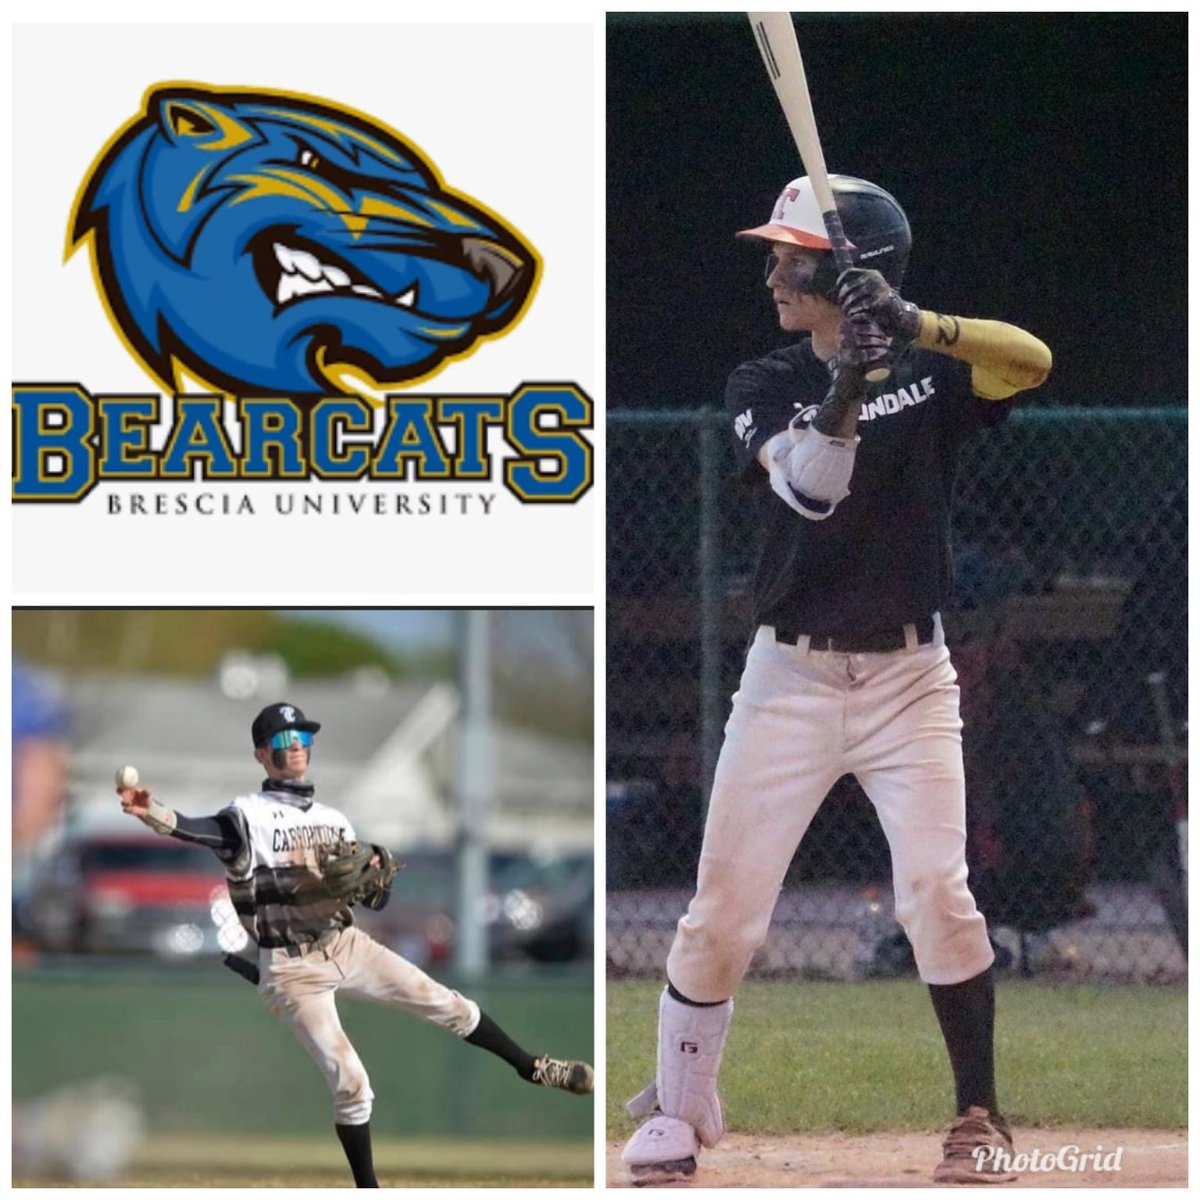 I’m excited to have the opportunity to be attending Brescia University to play baseball in Fall 2022.  I would like to thank everyone who helped make this possible and Coach Herbig for giving me this opportunity. @BresciaBaseball @Terrierbasebal1